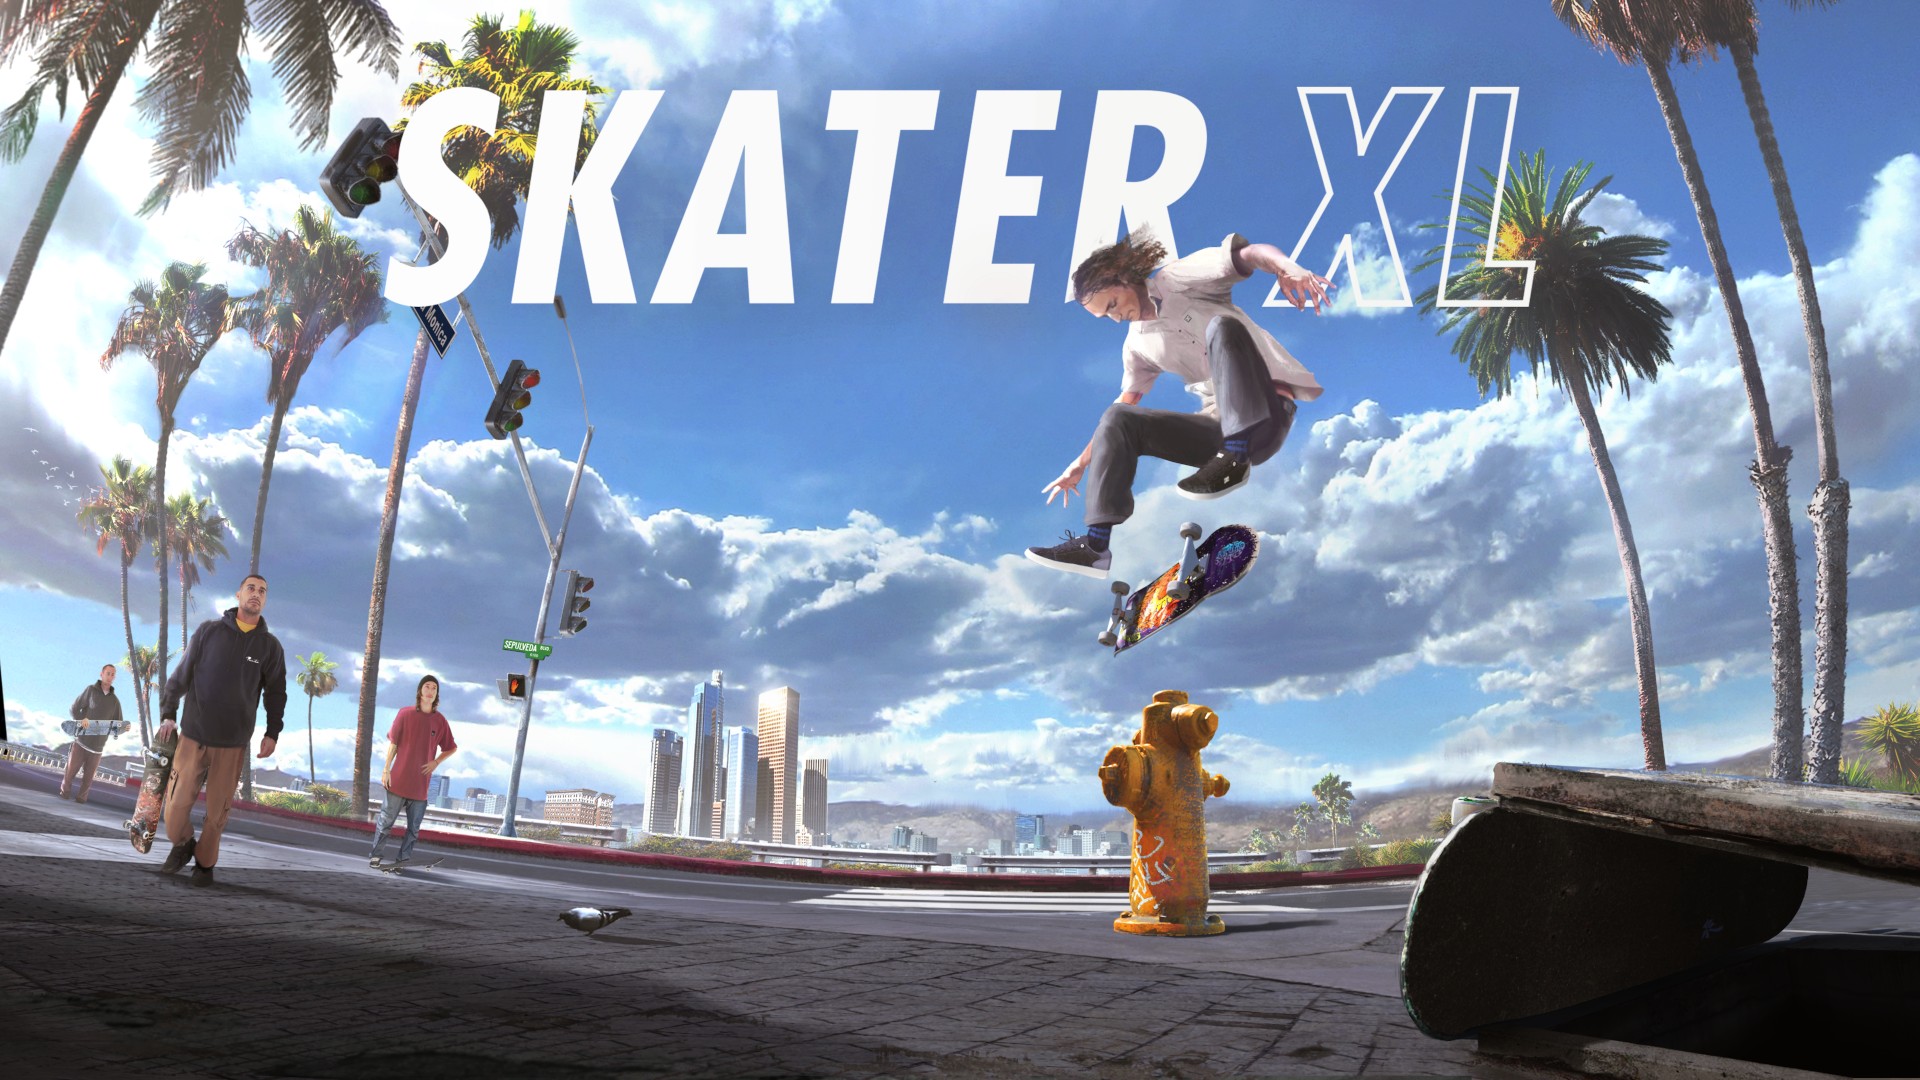 Skater xl free download download apple app store on pc